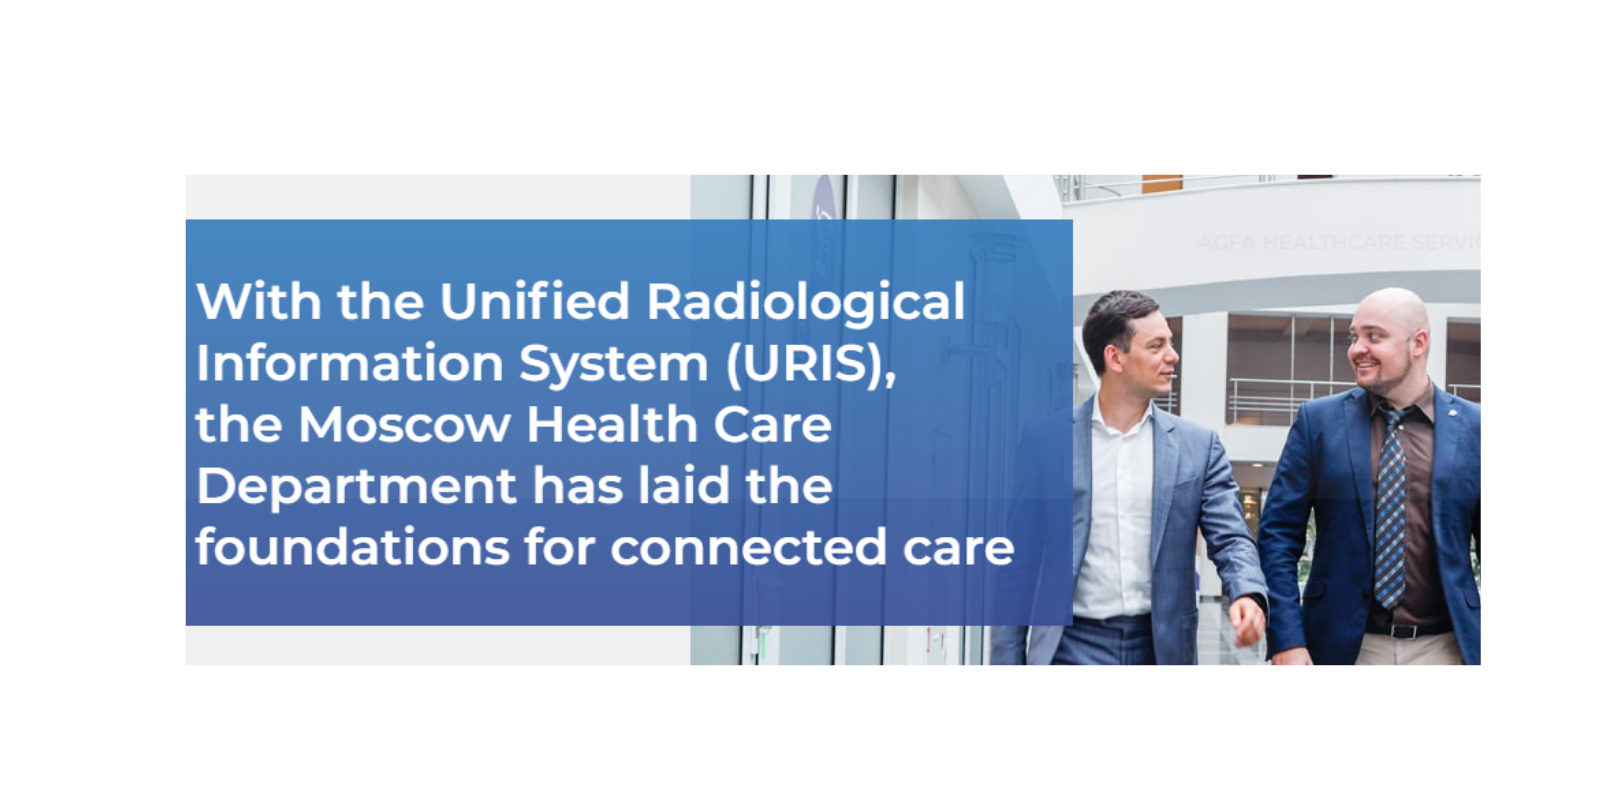 With the Unified Radiological Information System (URIS), the Moscow Health Care Department has laid the foundations for connected care